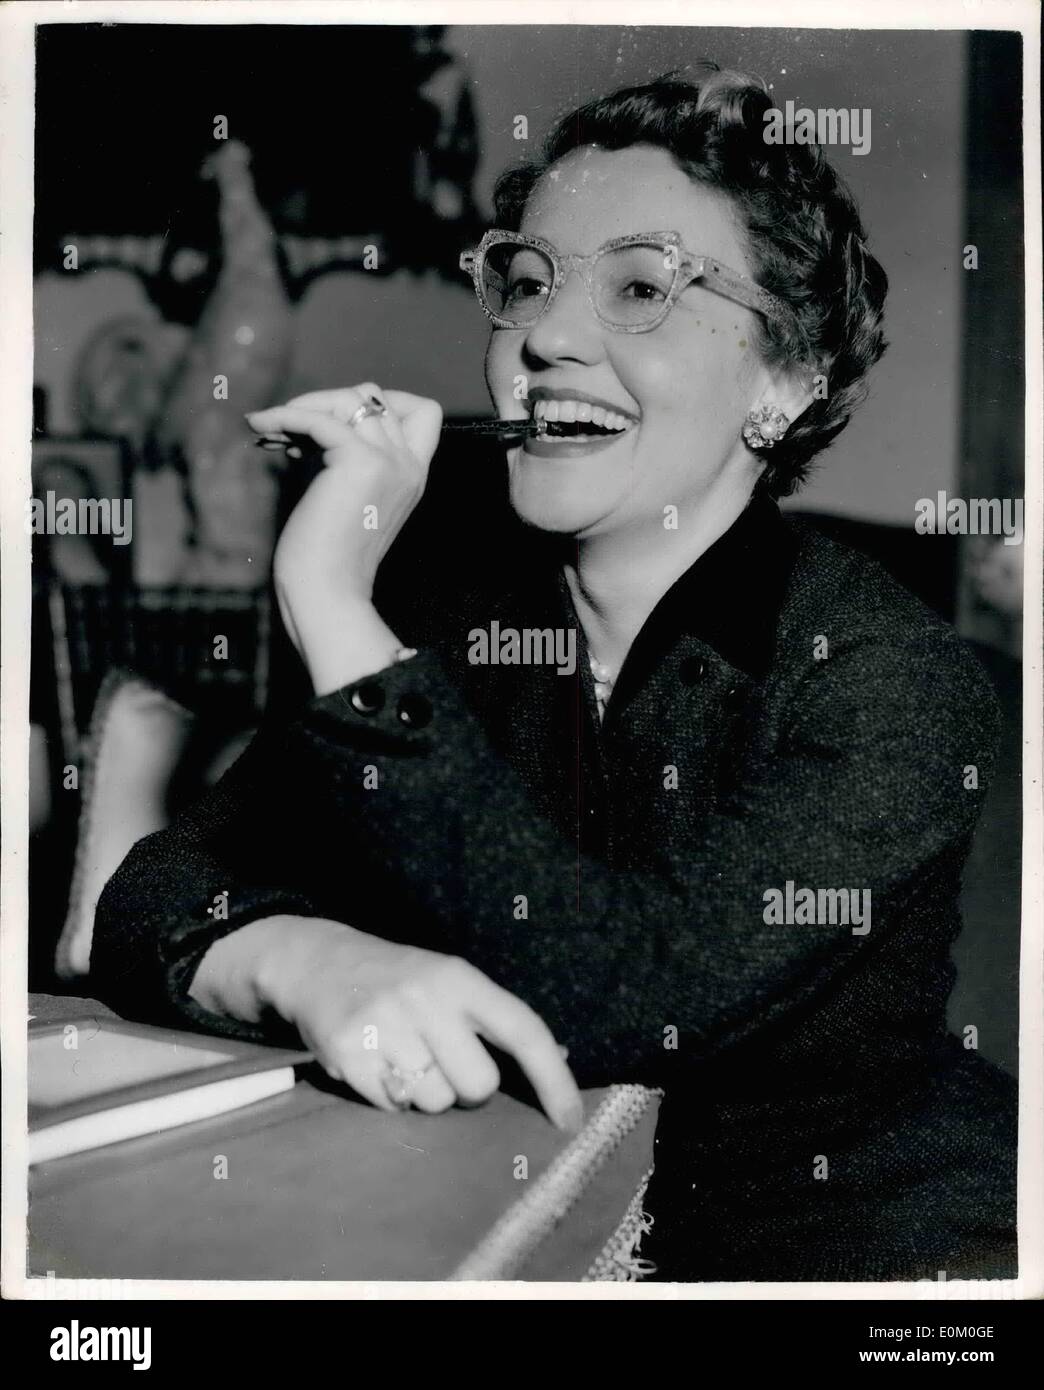 Jan. 01, 1953 - Mrs. Douglas Fairbanks sports silver flecked specs. Discussing training center: Photo shows Mrs. Douglas Fairbanks wore silver flecked spectacles - one of astock of fourteen pairs - to welcome 50 guests at her London home yesterday. Mrs. Fairbanks and her guests were discussing the raising of further &pound;25,000 for R.A.D.A.'s new training theater. Stock Photo